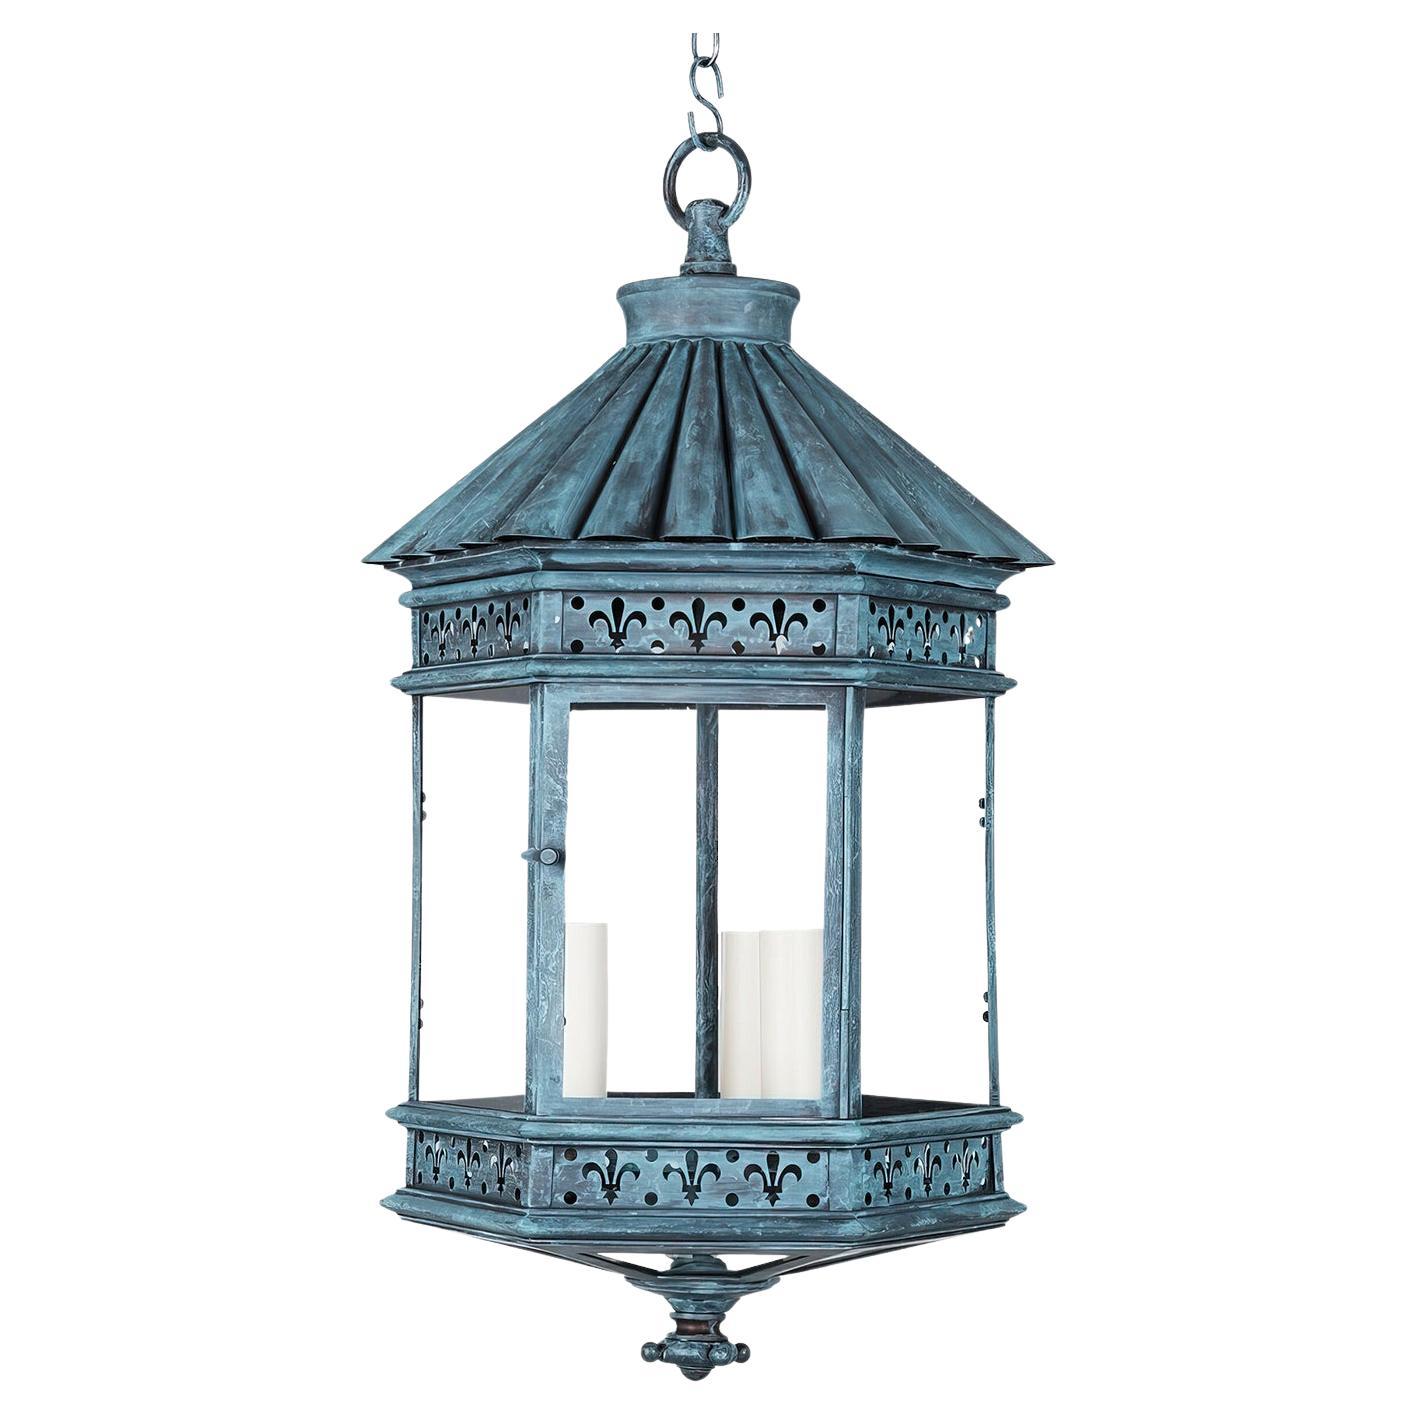 French Country Lantern - Verdigris Finish For Sale